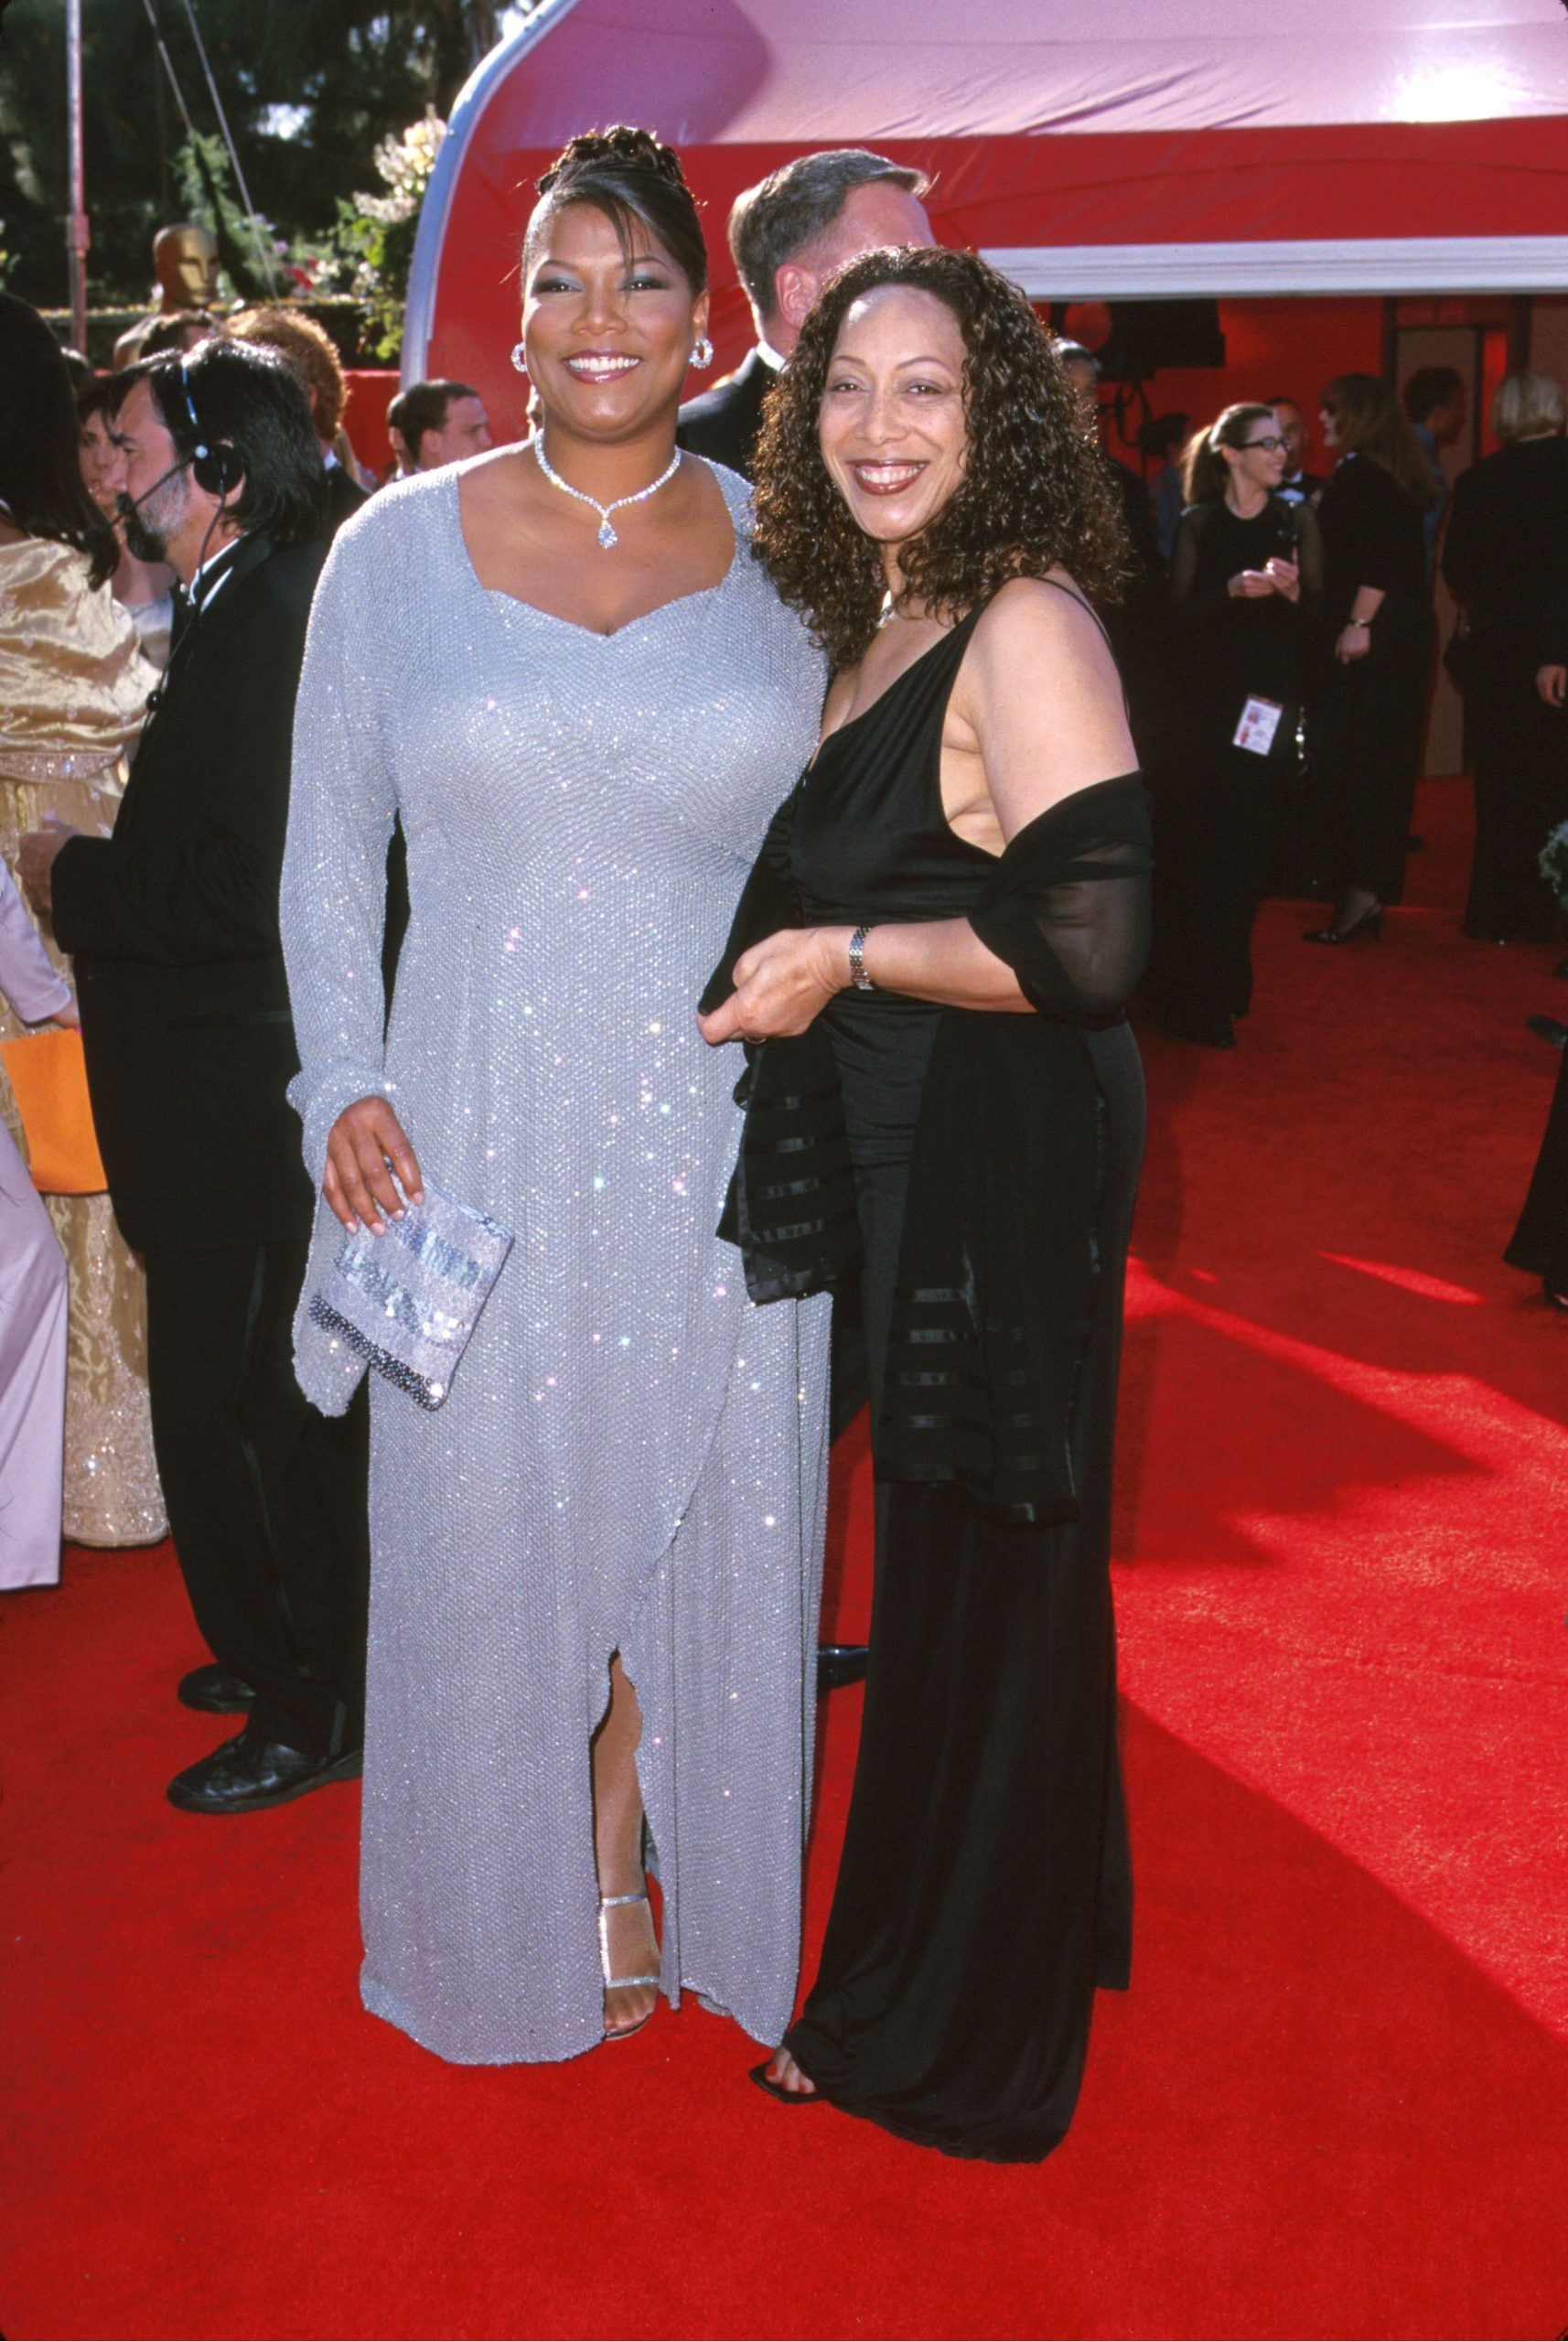 13 Photos Of Stars Attending The Academy Awards With Their Moms